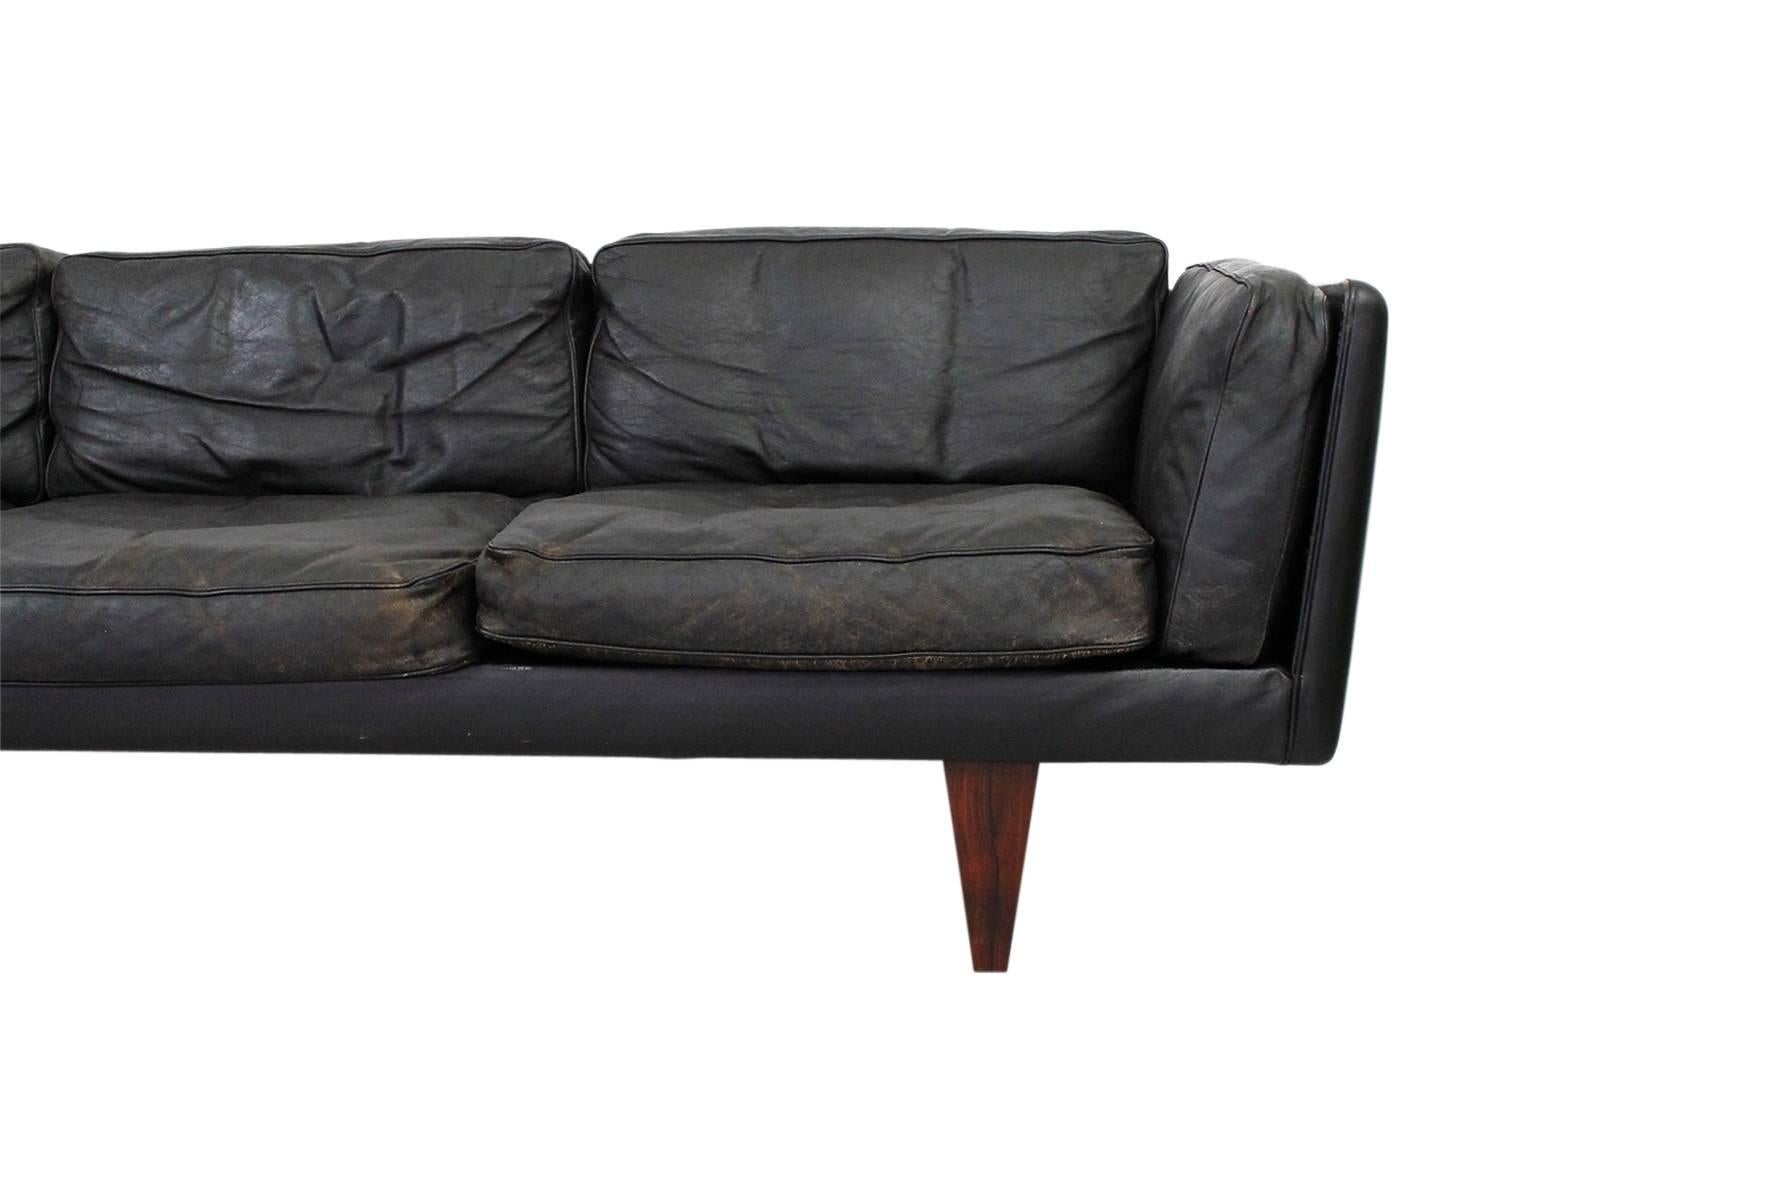 Mid-20th Century Leather and Rosewood Sofa by Illum Wikkelso